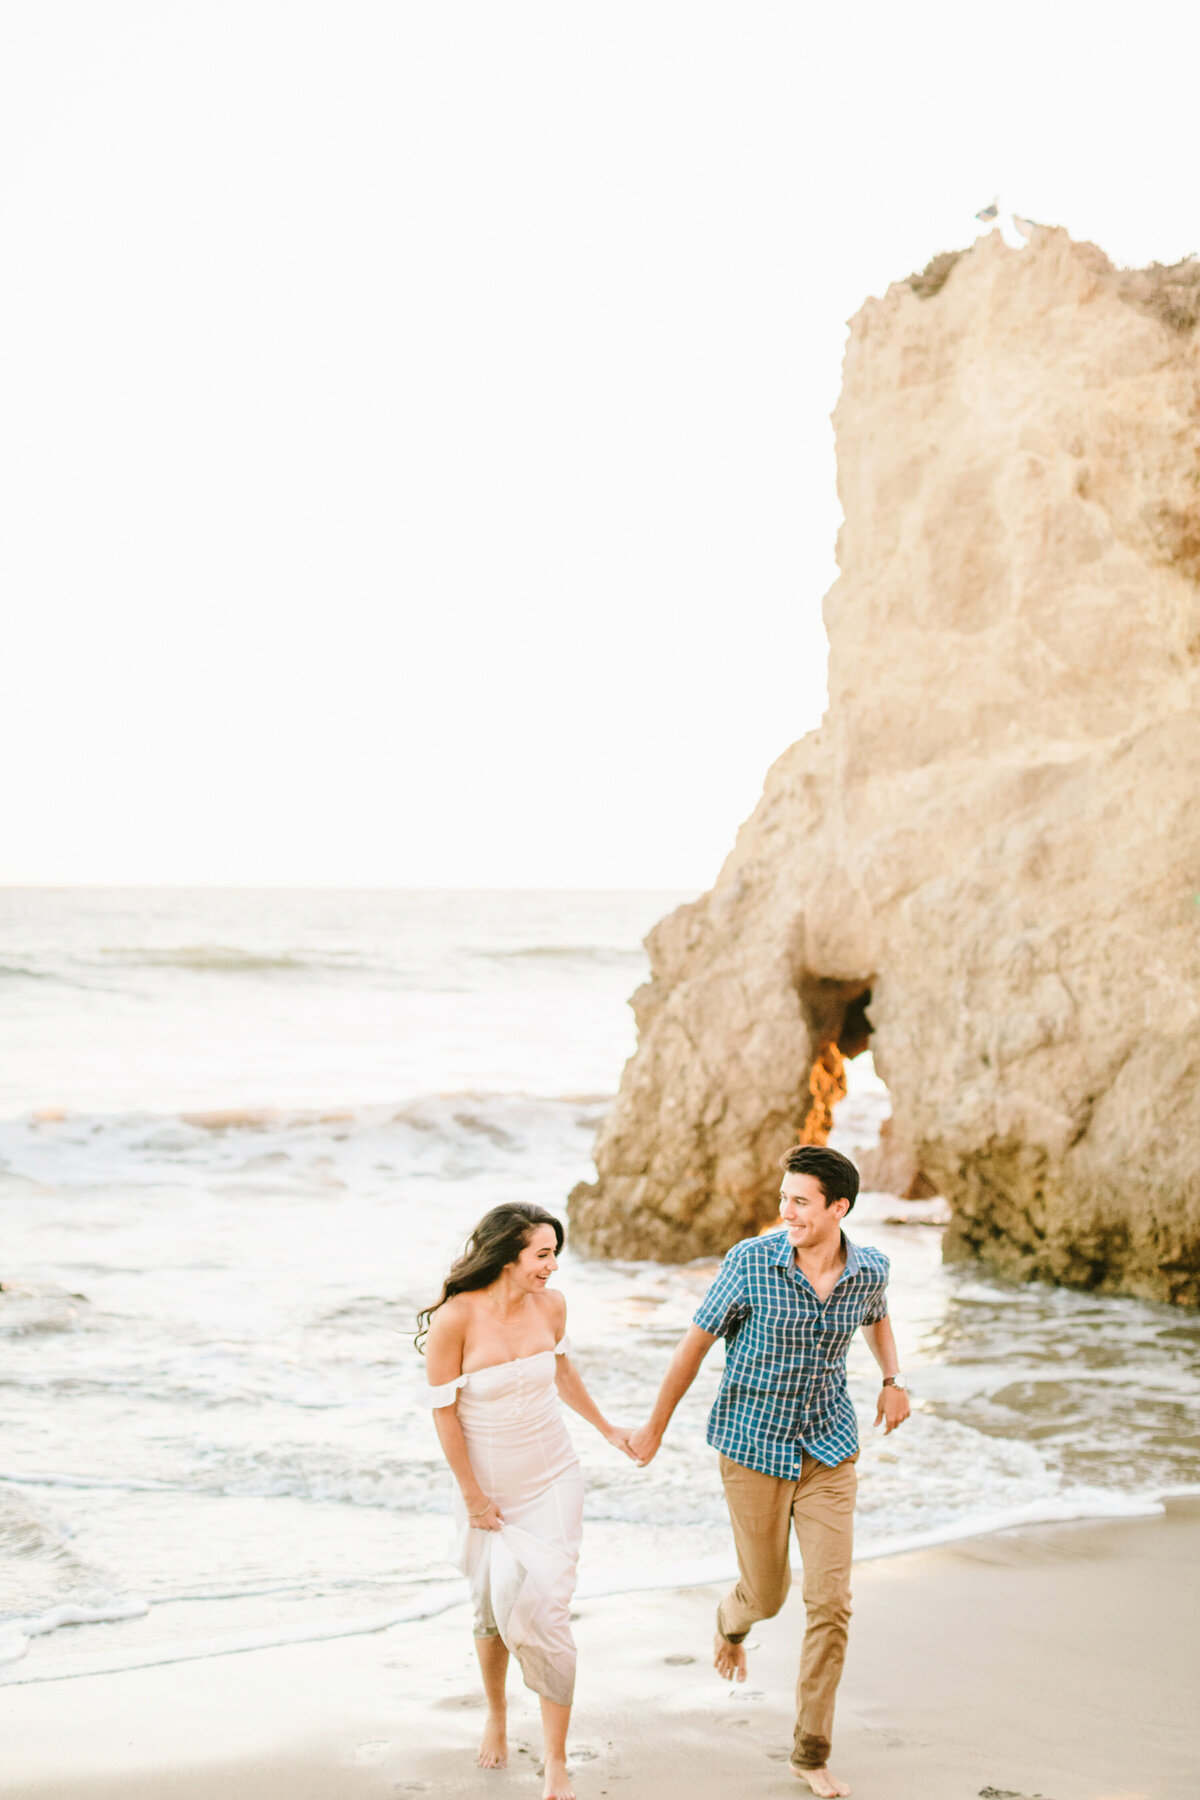 Best California and Texas Engagement Photos-Jodee Friday & Co-199